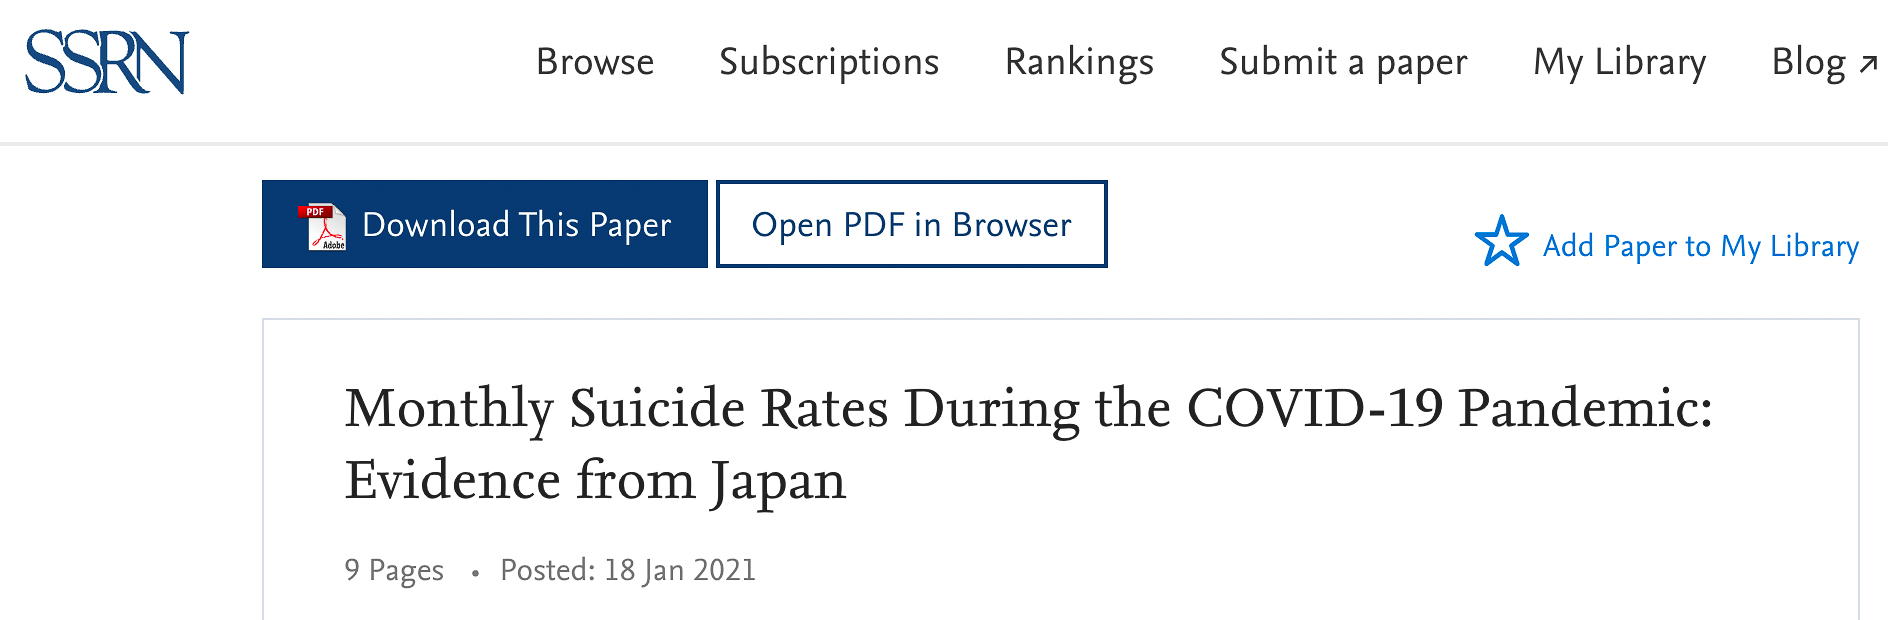 Monthly Suicide Rates During the COVID-19 Pandemic- Evidence from Japan